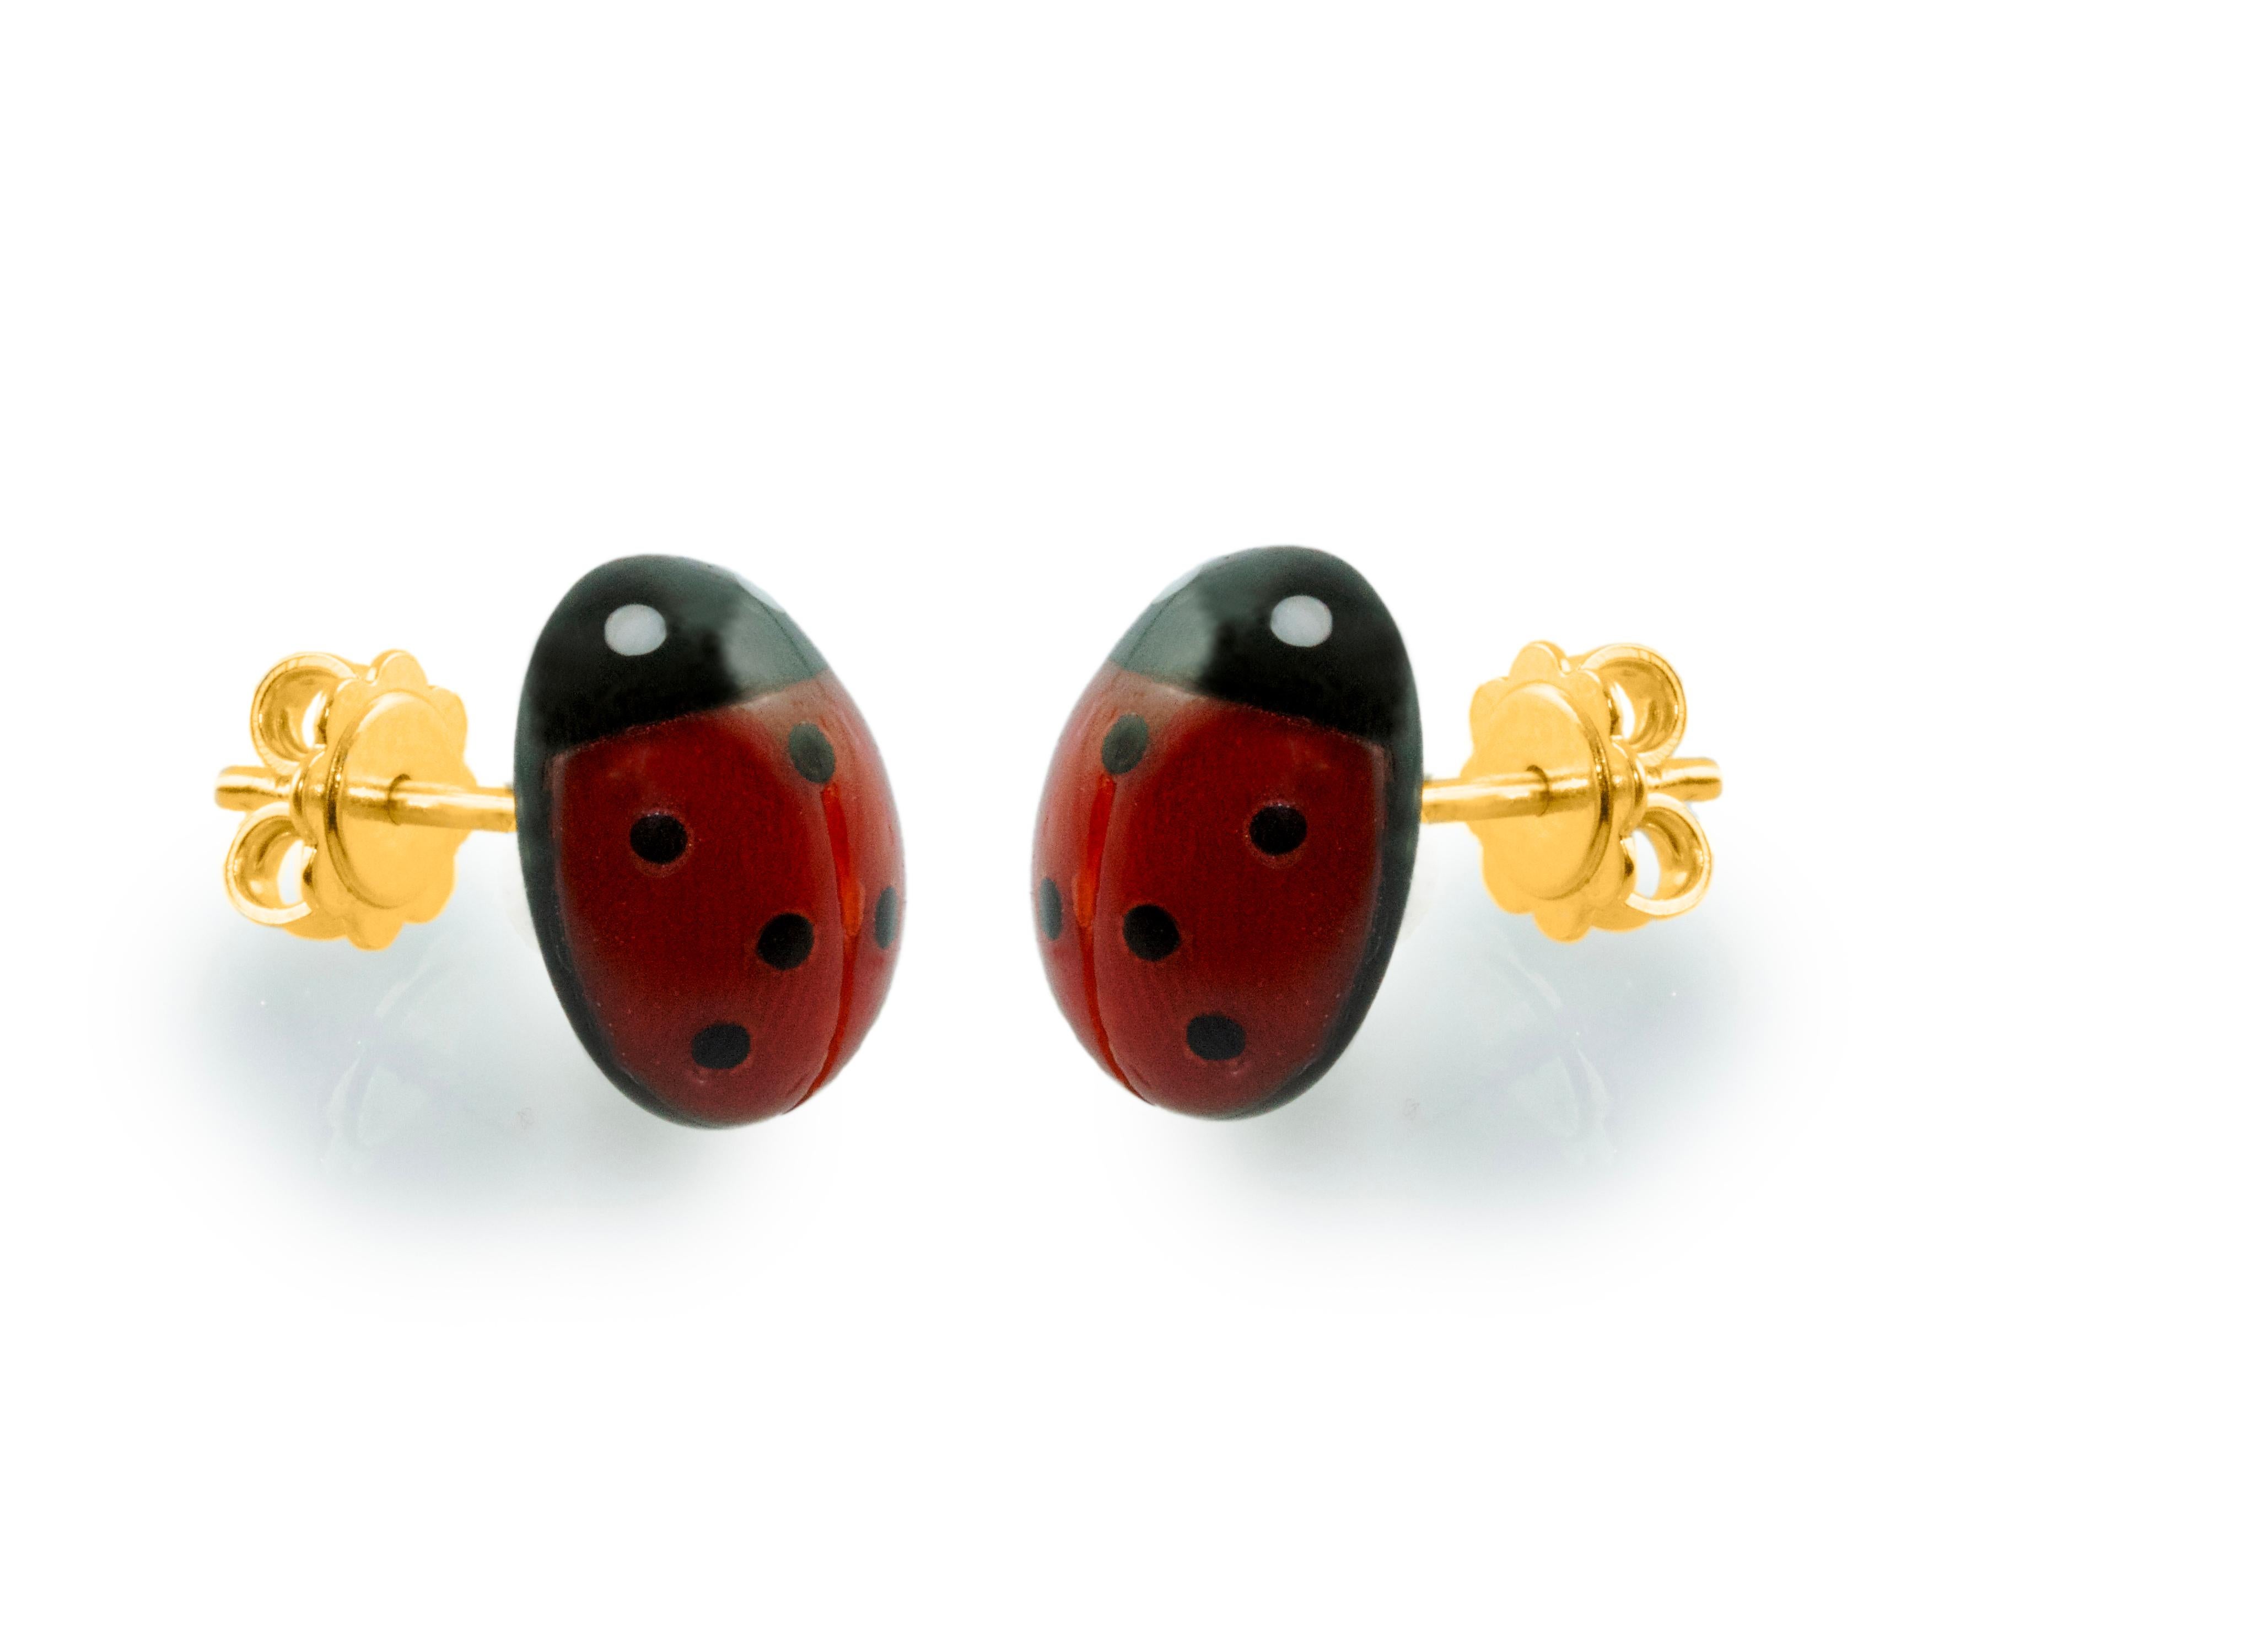 These stud earrings  are made with coral sourced in the Mediterranean and Onyx, each face have been hand-carved shaped like a ladybug with a smooth, bulging surface. 
The post in the back is made of 18k yellow gold.